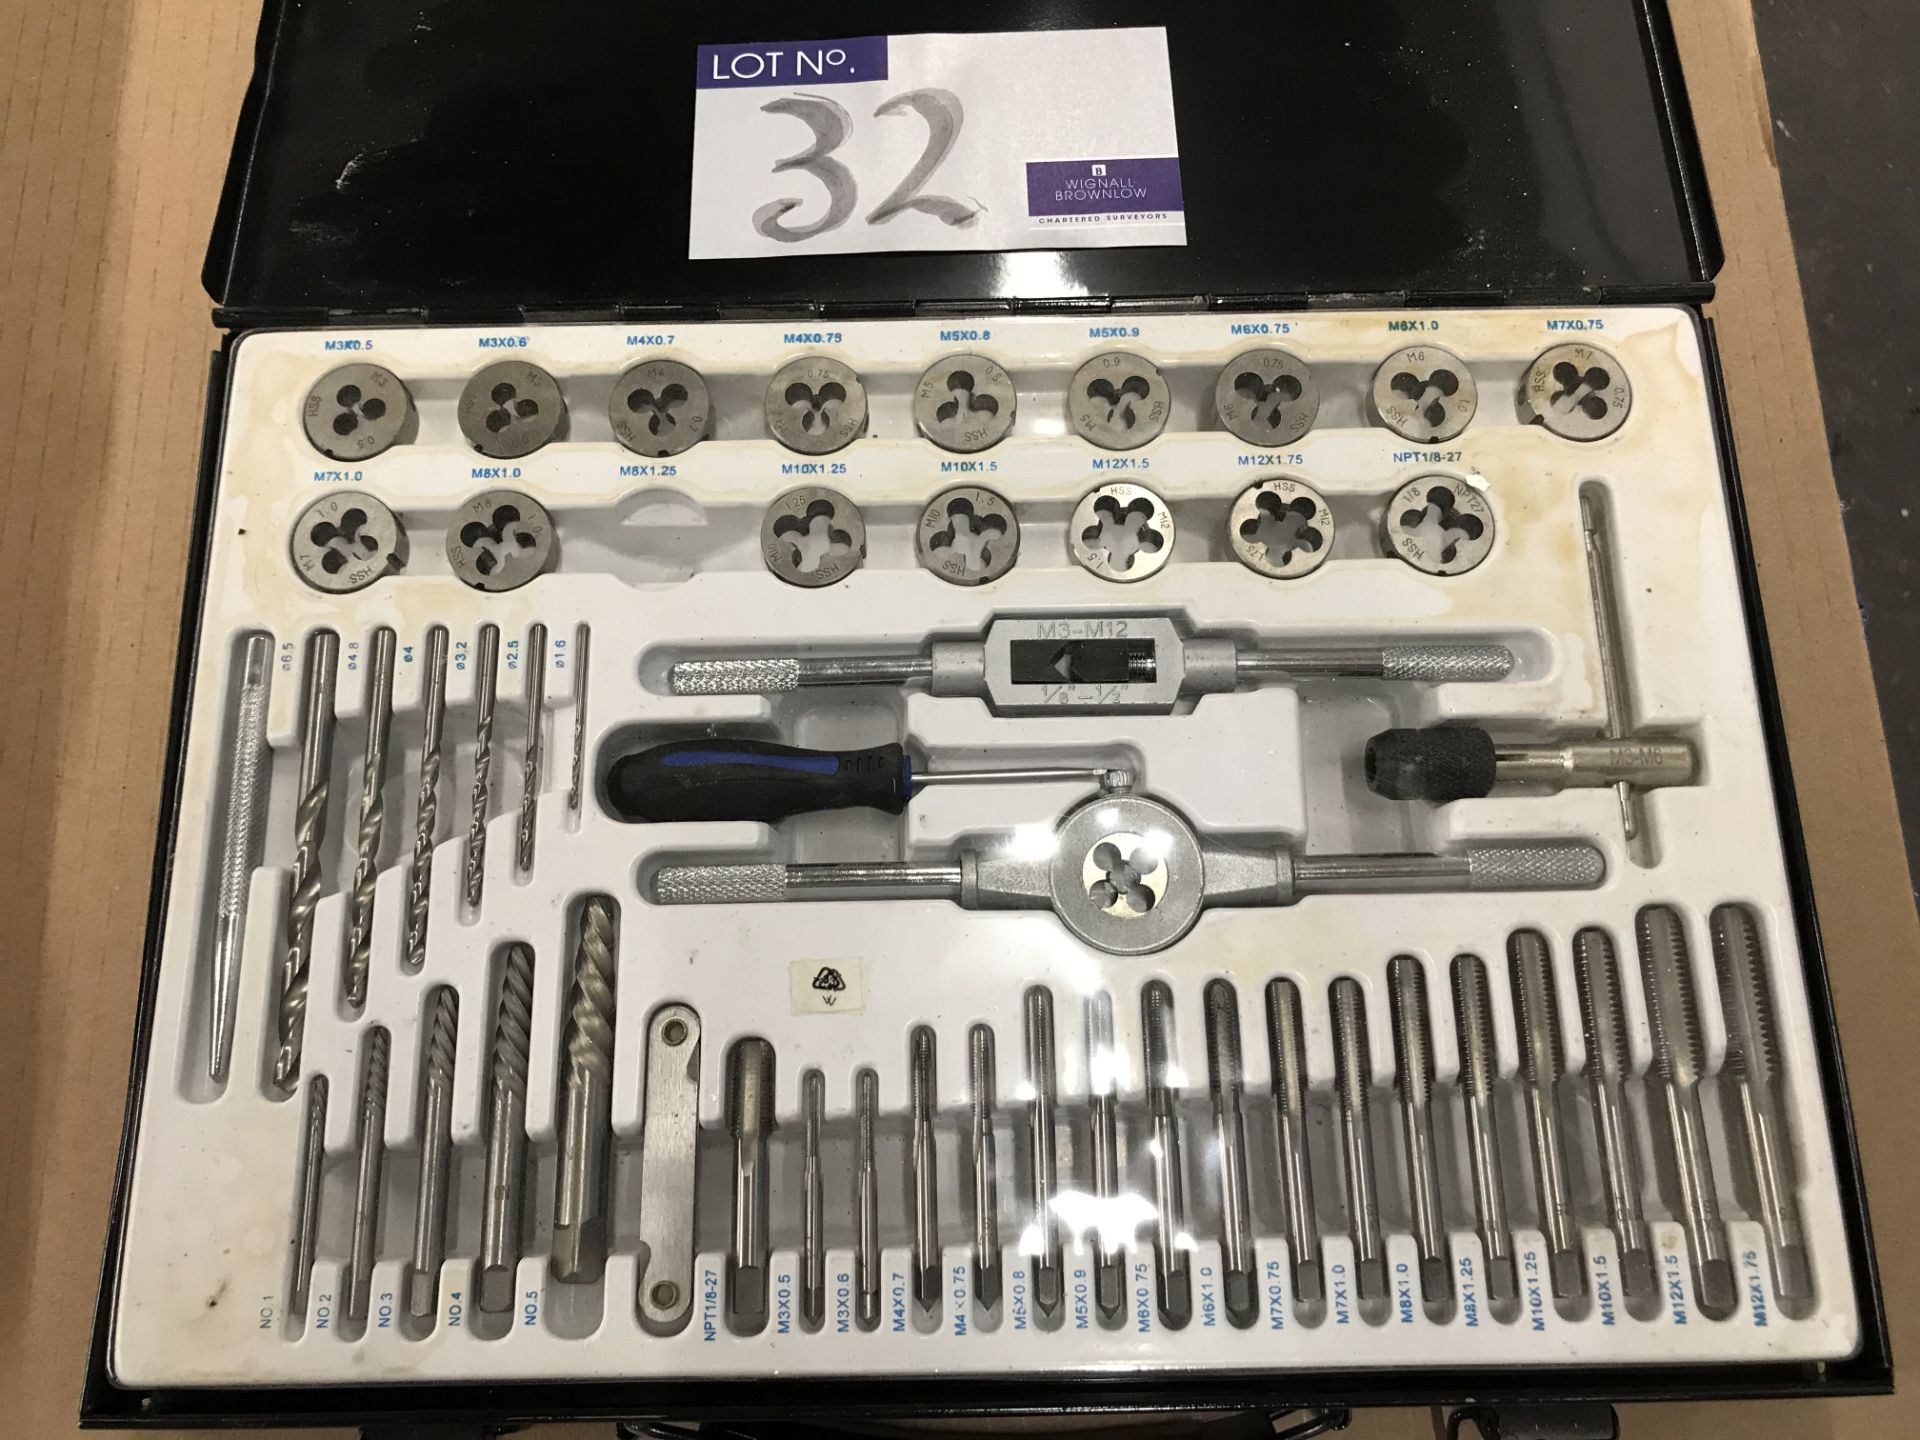 A Tap and Die Set in carry case.